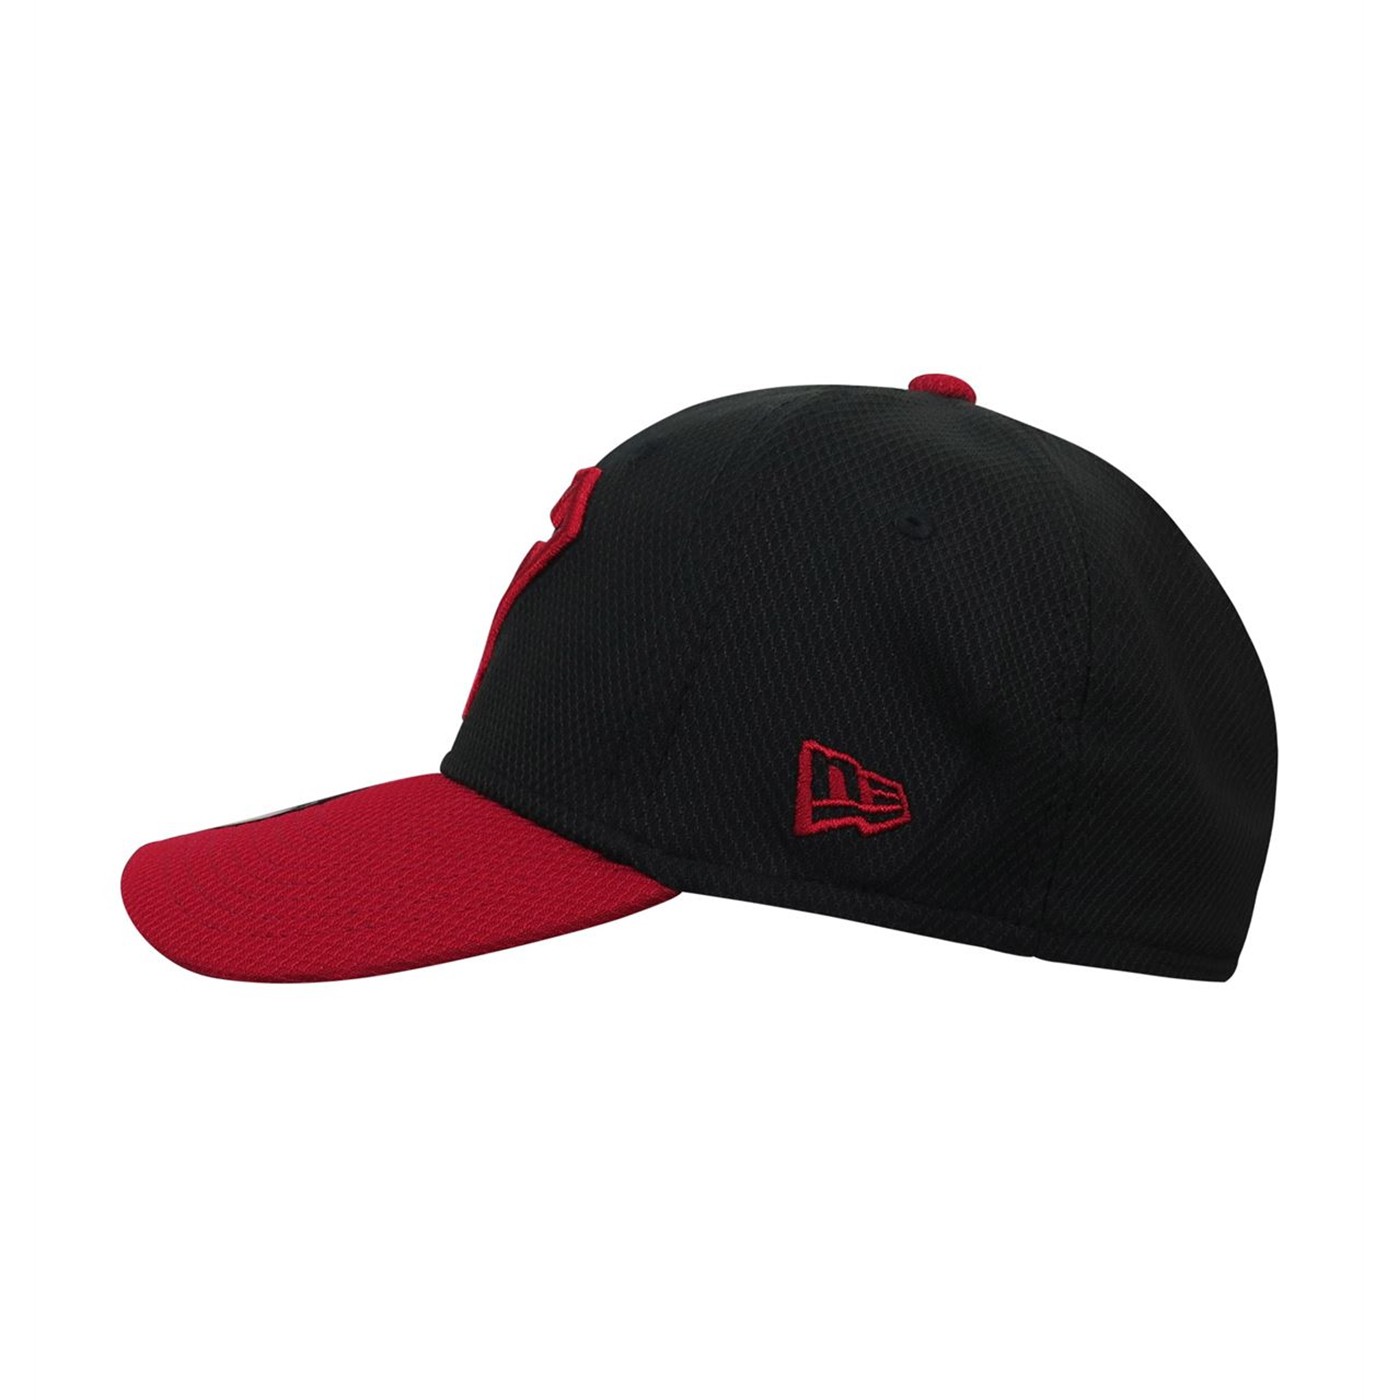 Superboy Symbol Red & Black 39Thirty Fitted Hat